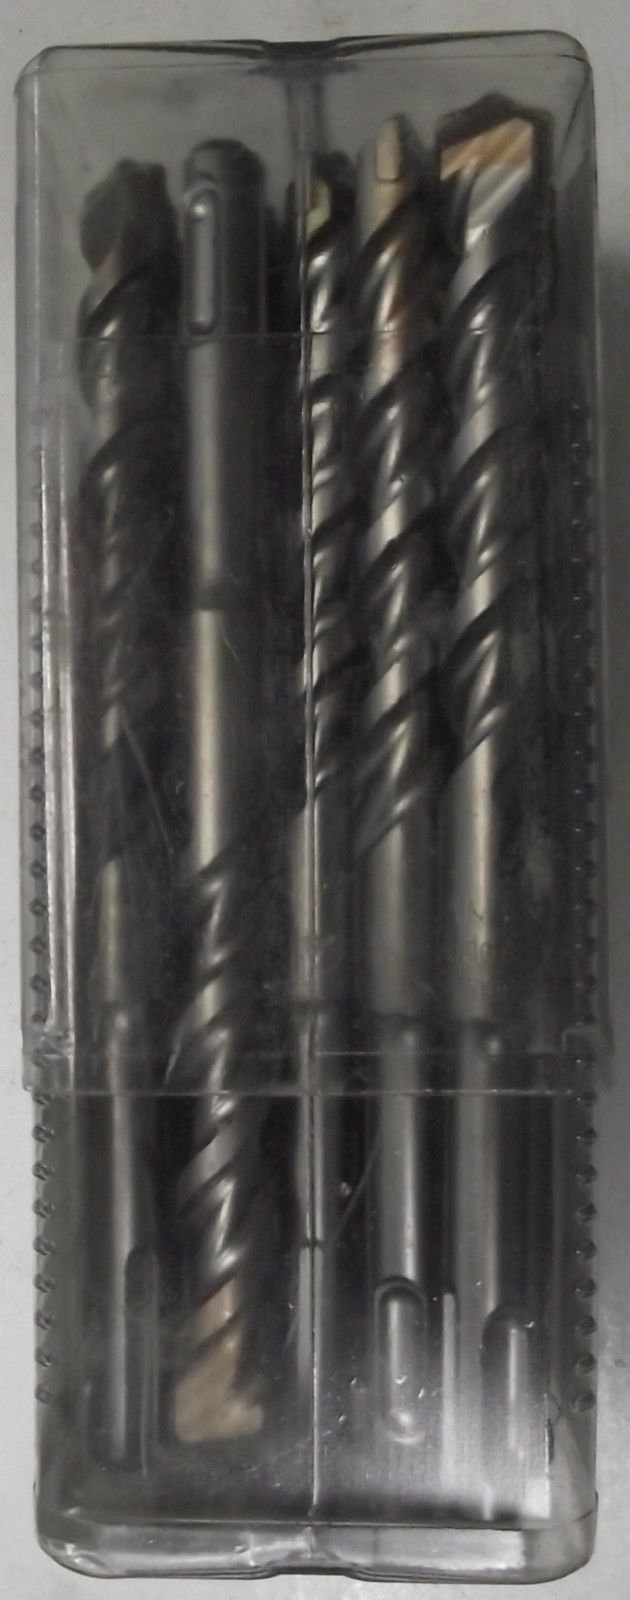 Milwaukee 48-20-7571 1/2 in. x 4 in. x 6 in. SDS+ Rotary Drill Bit 15pcs Germany